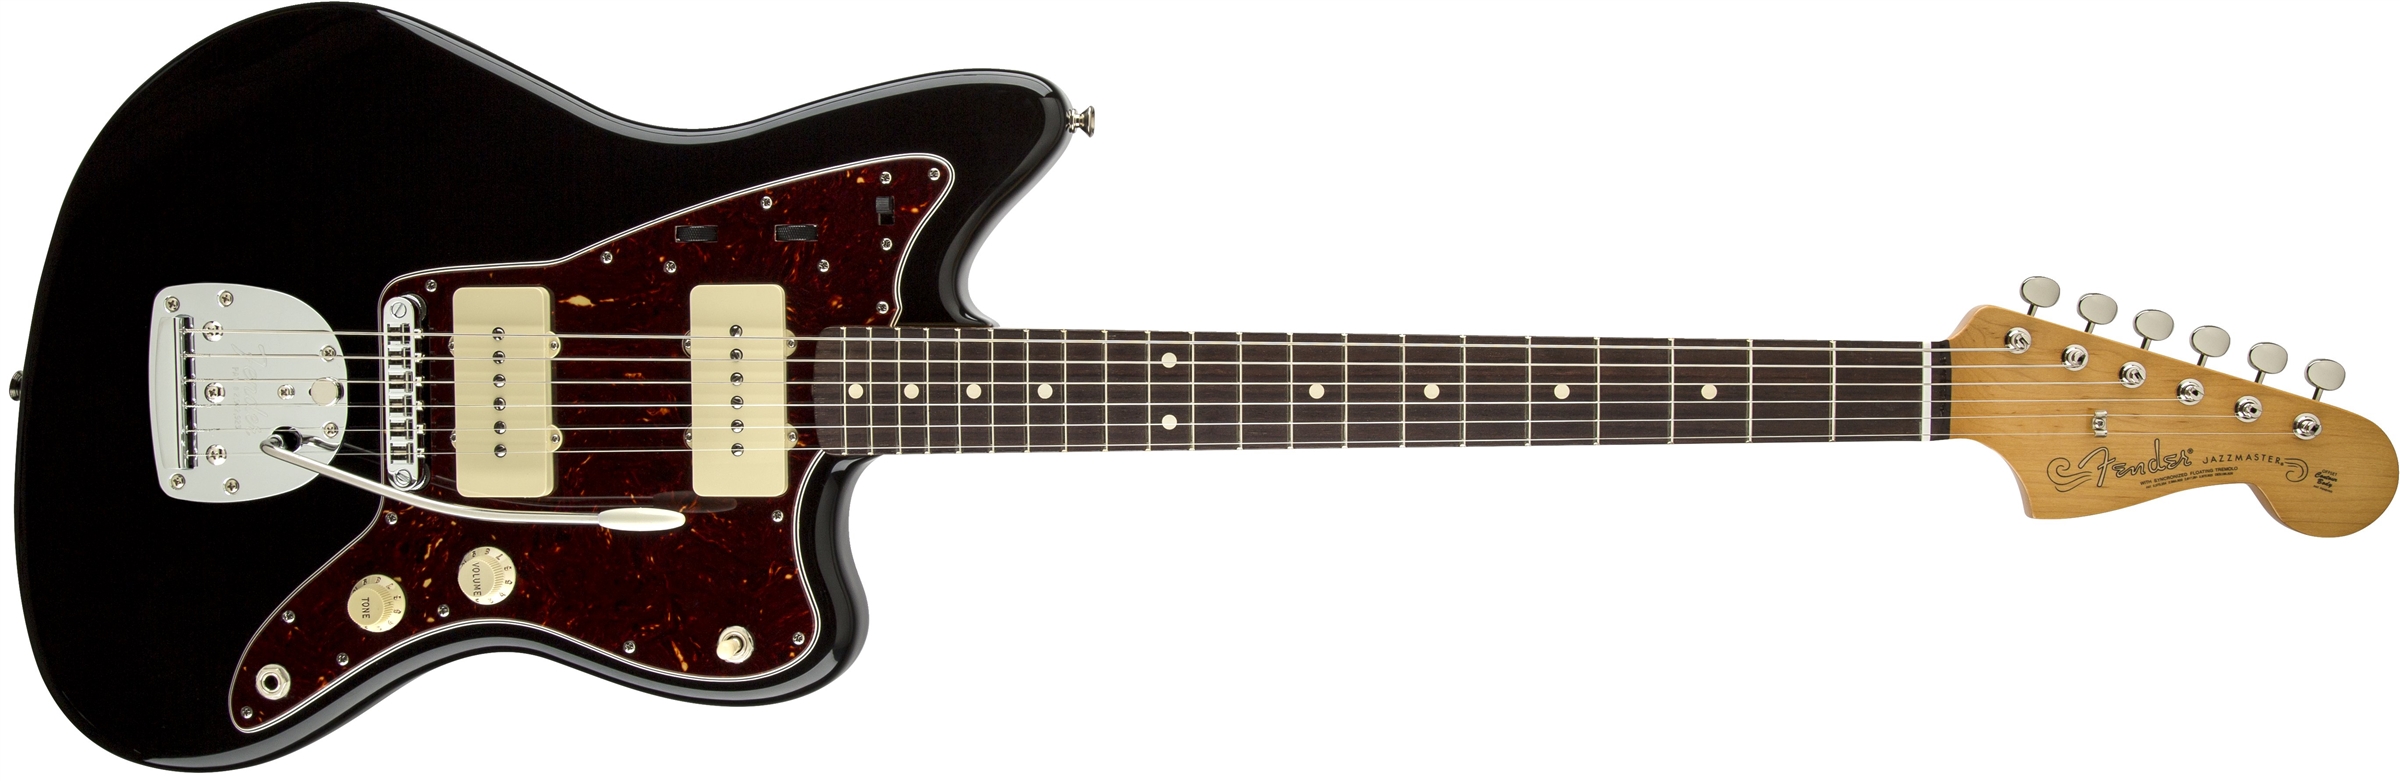 Fender Classic Player Jazzmaster Special Black Rosewood